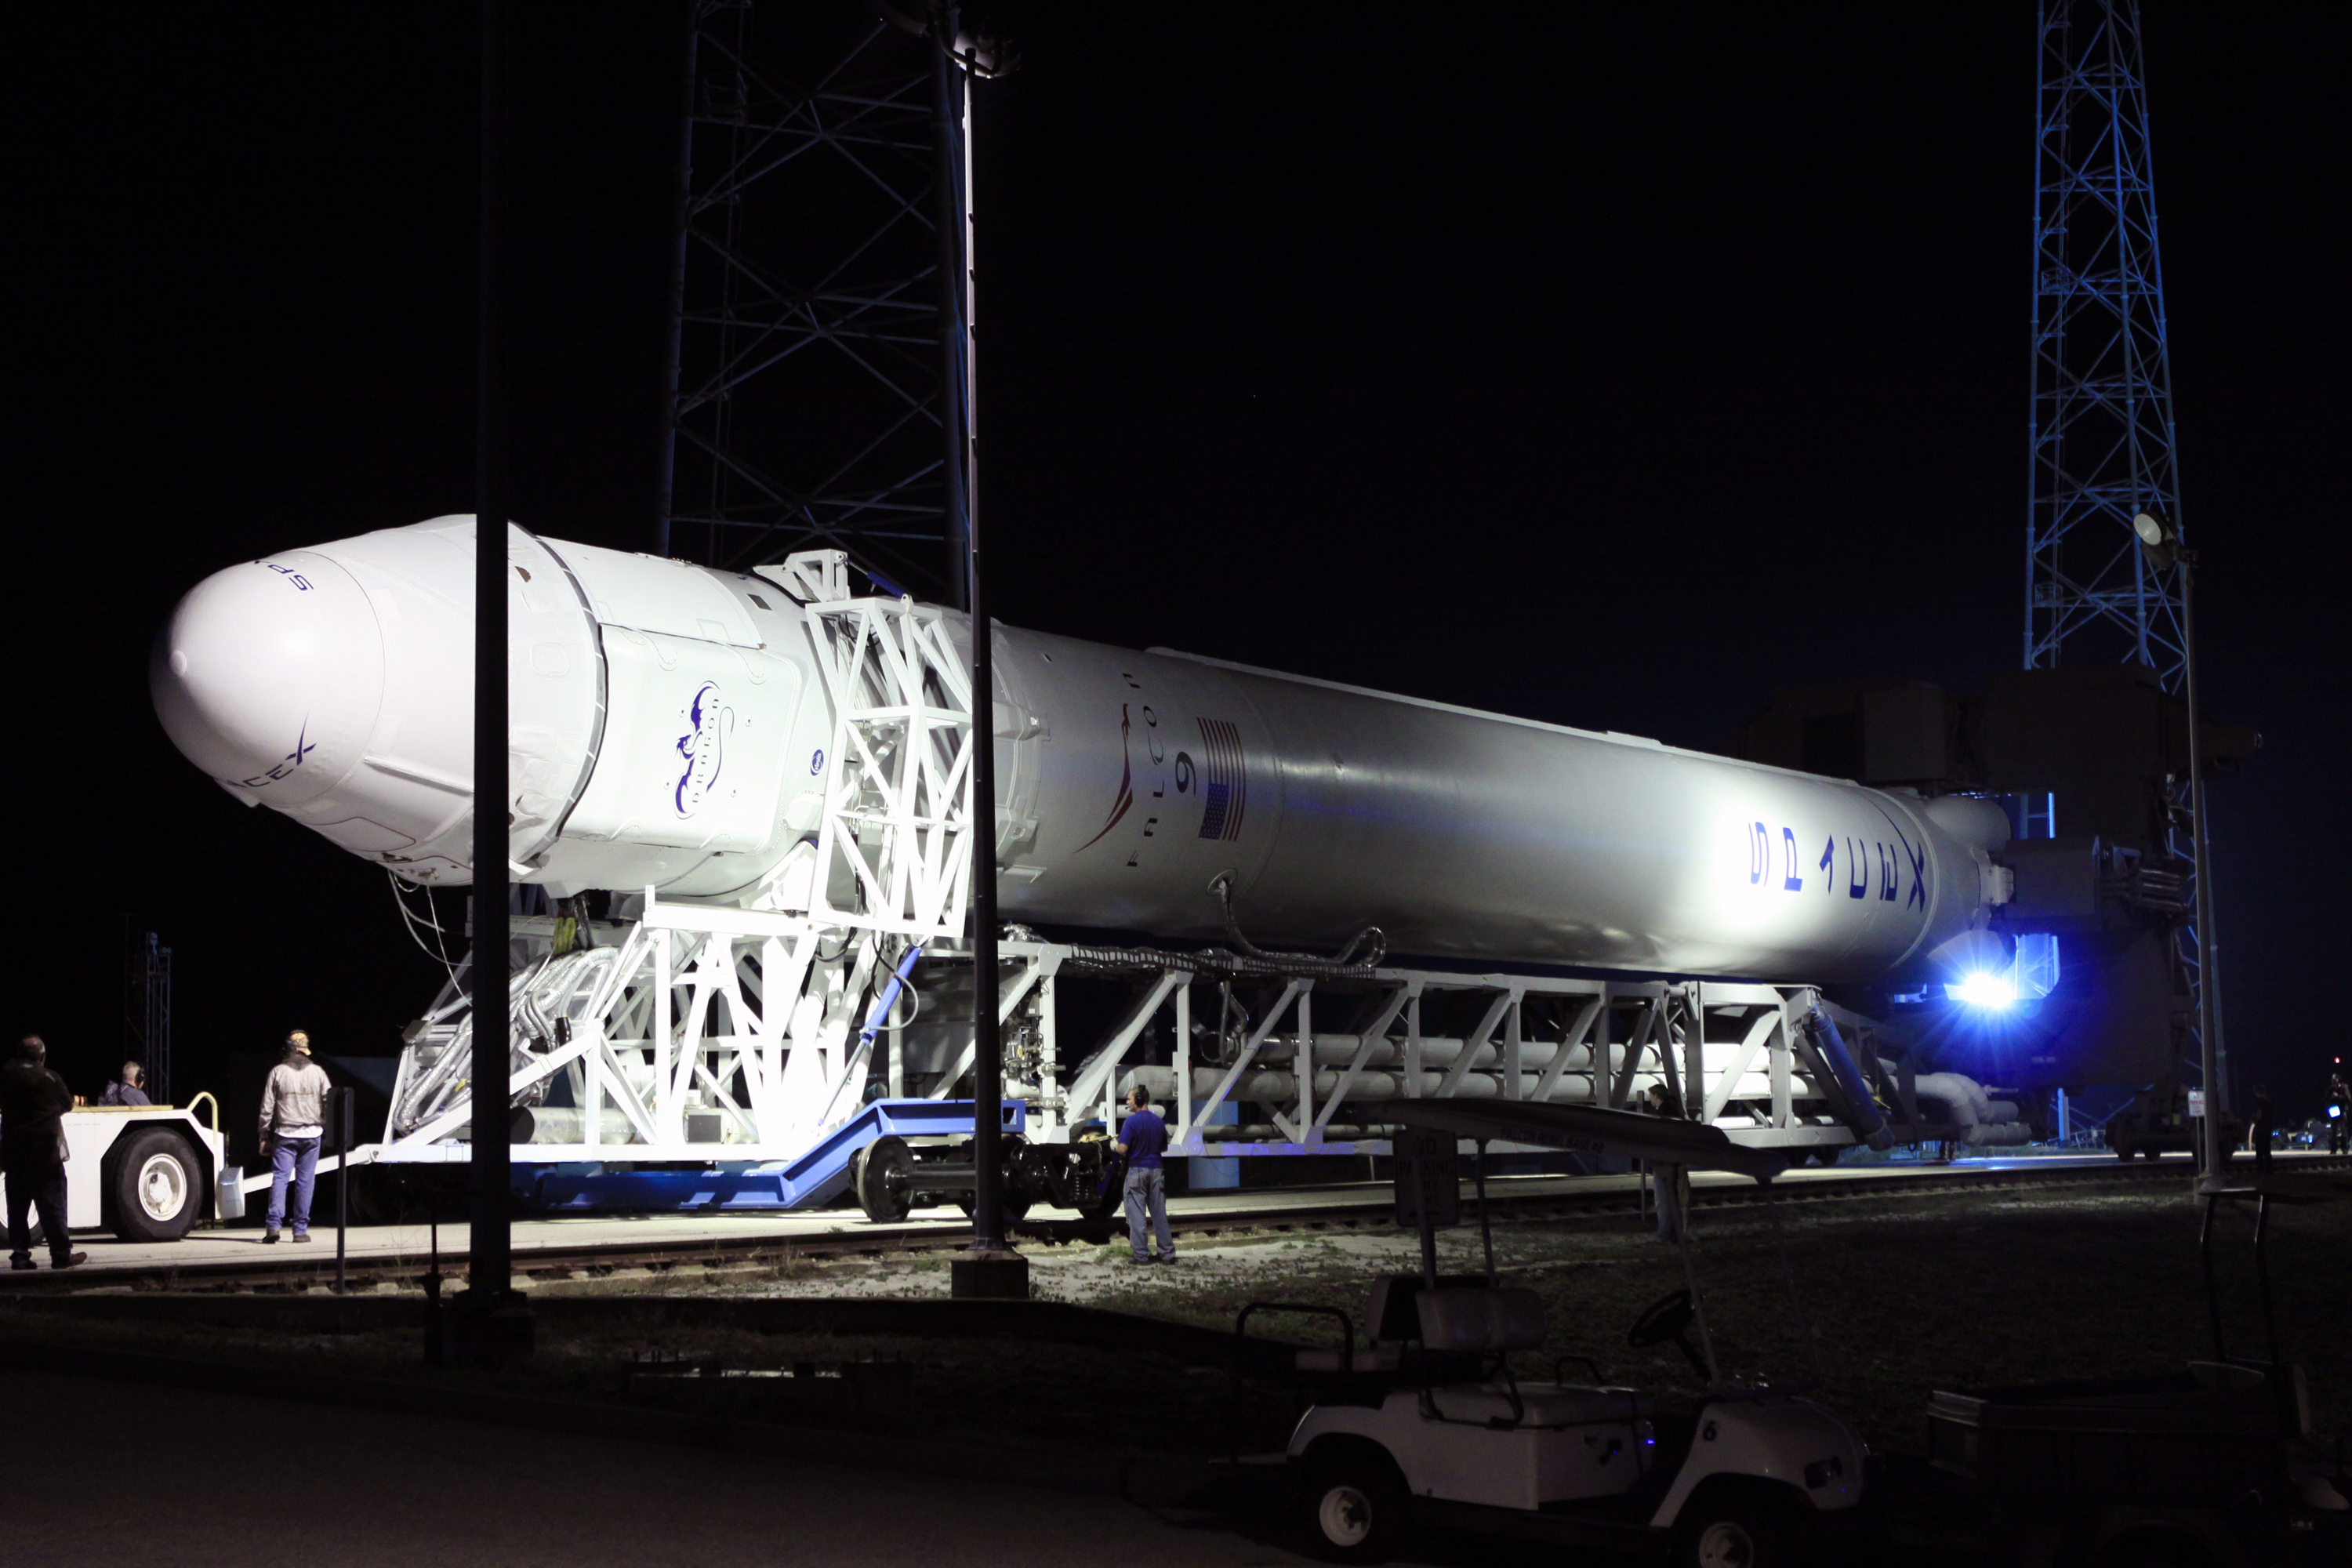 Spacex Falcon 9 Wallpaper   Pics about space